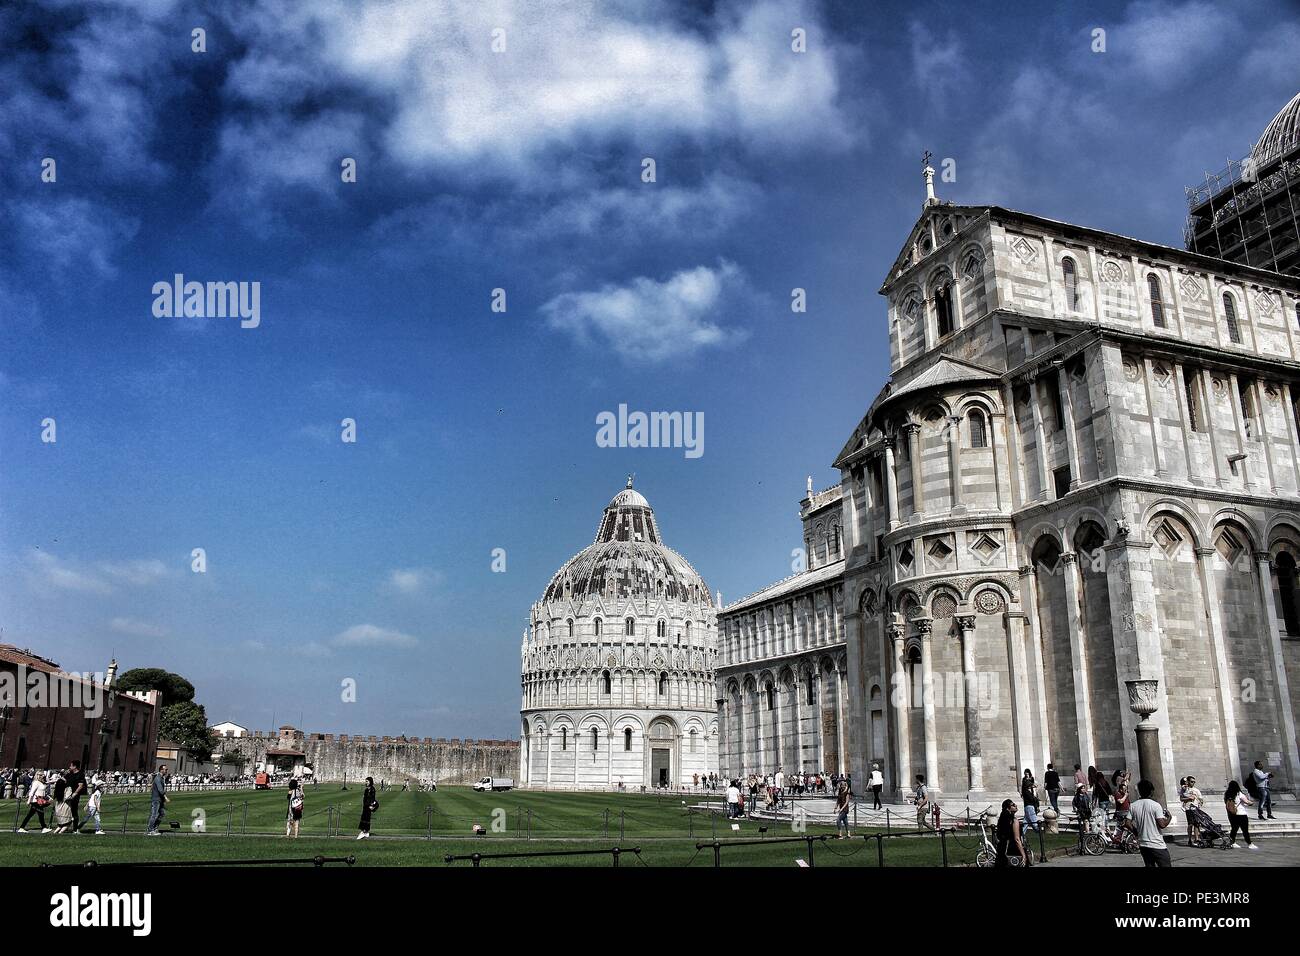 A landscape view of the landmarks in Pisa, Italy Stock Photo